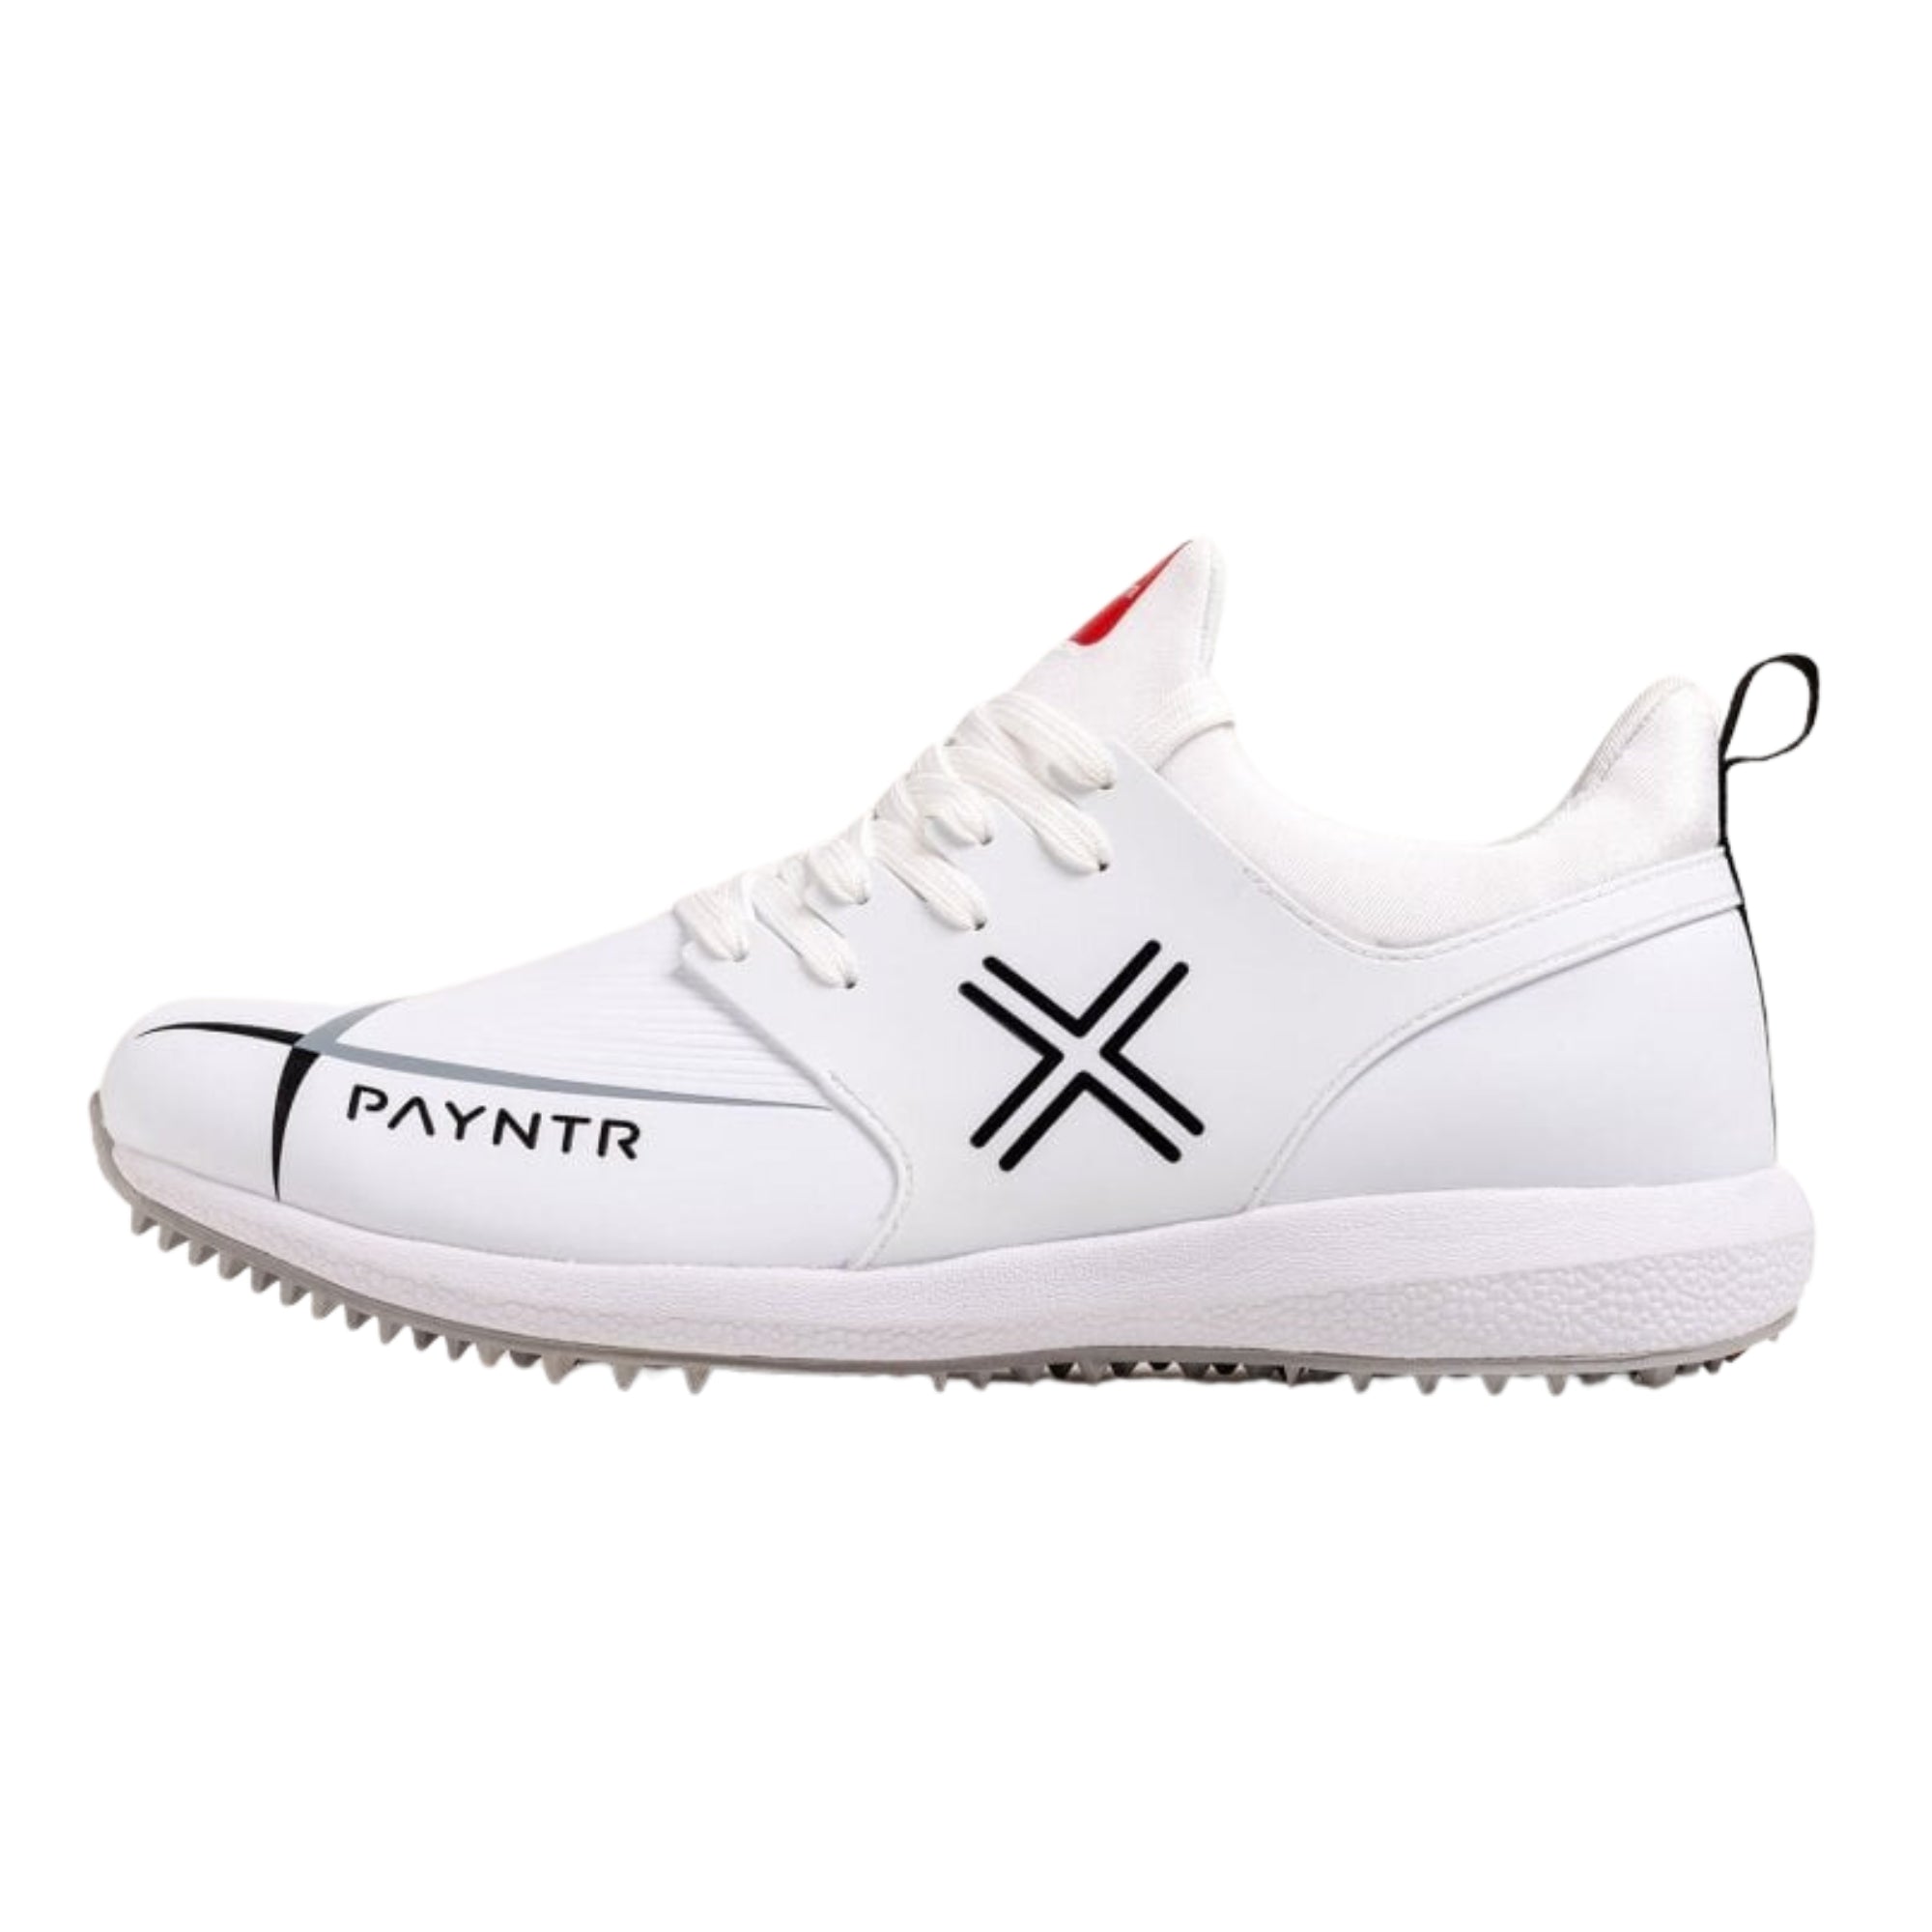 Payntr Cricket Shoes, Model X MK3 Pimple - All White All Rounder Cricket Shoes